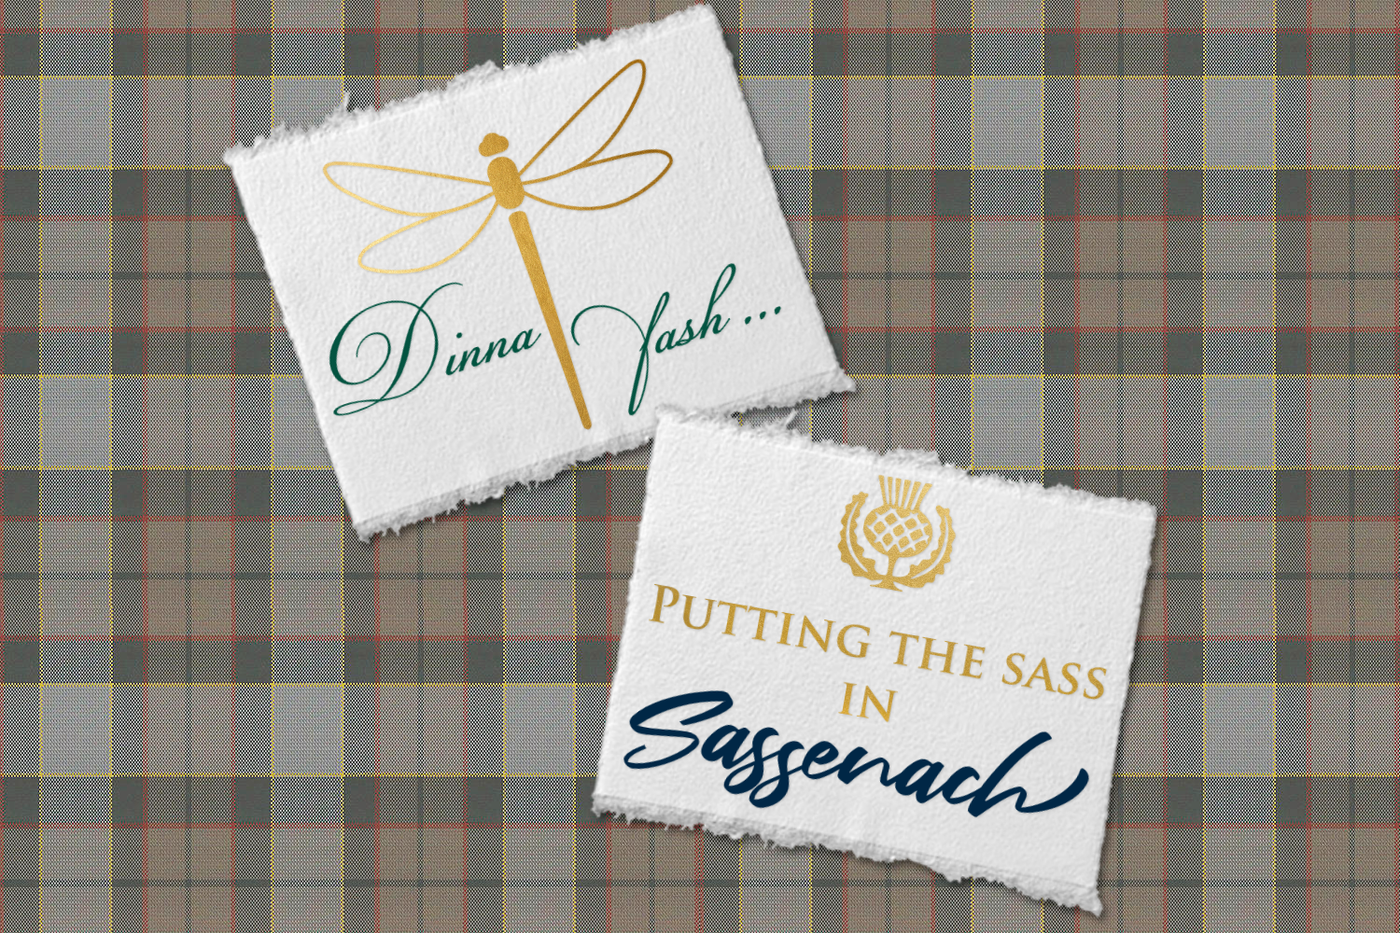 Two cards on a tartan background. One has a dragonfly and says "Dinna fash..." The other has a thistle symbol and says "Putting the sass in Sassenach."